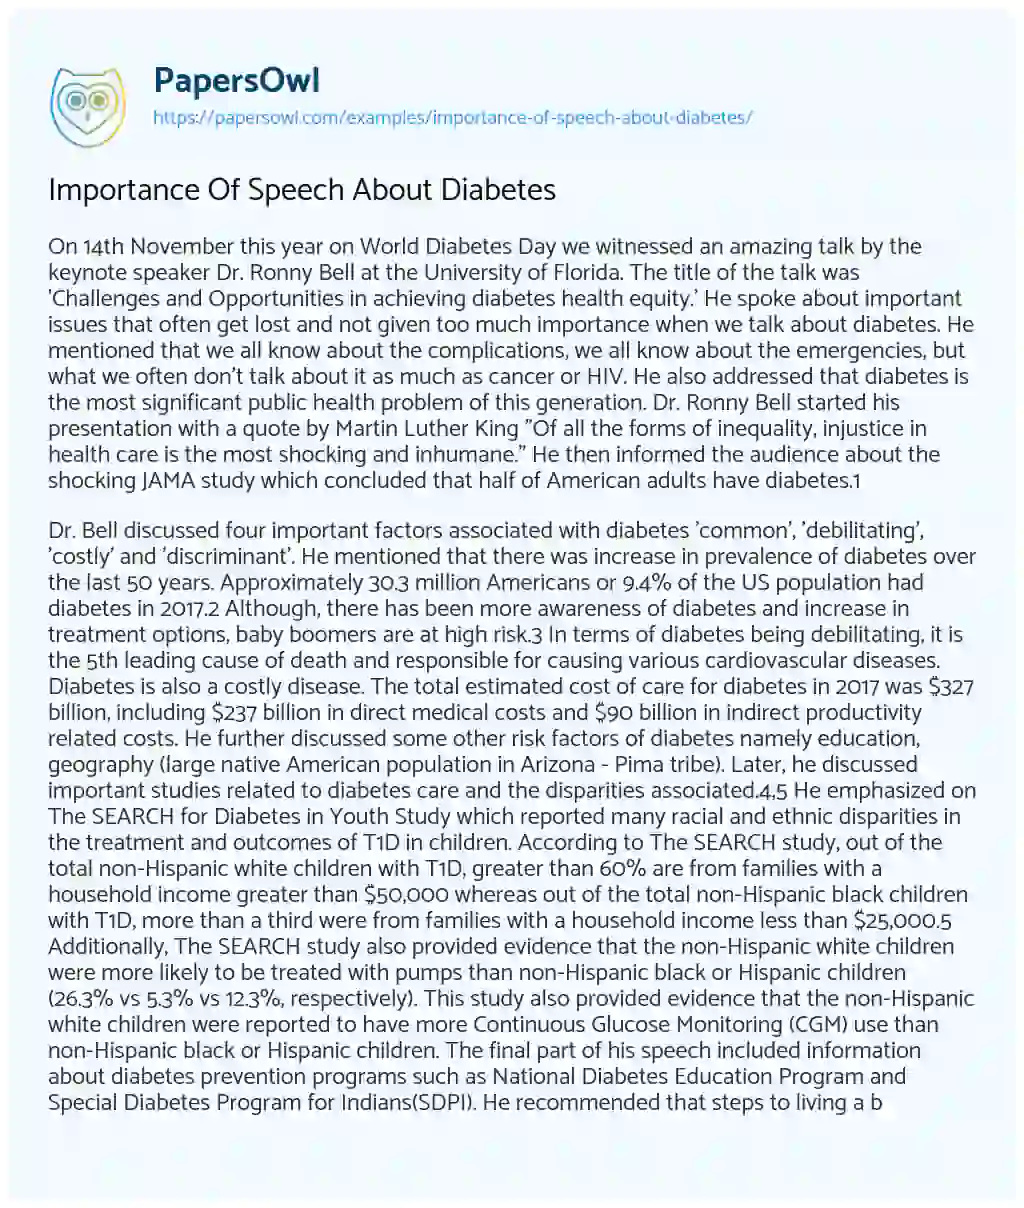 Essay on Importance of Speech about Diabetes